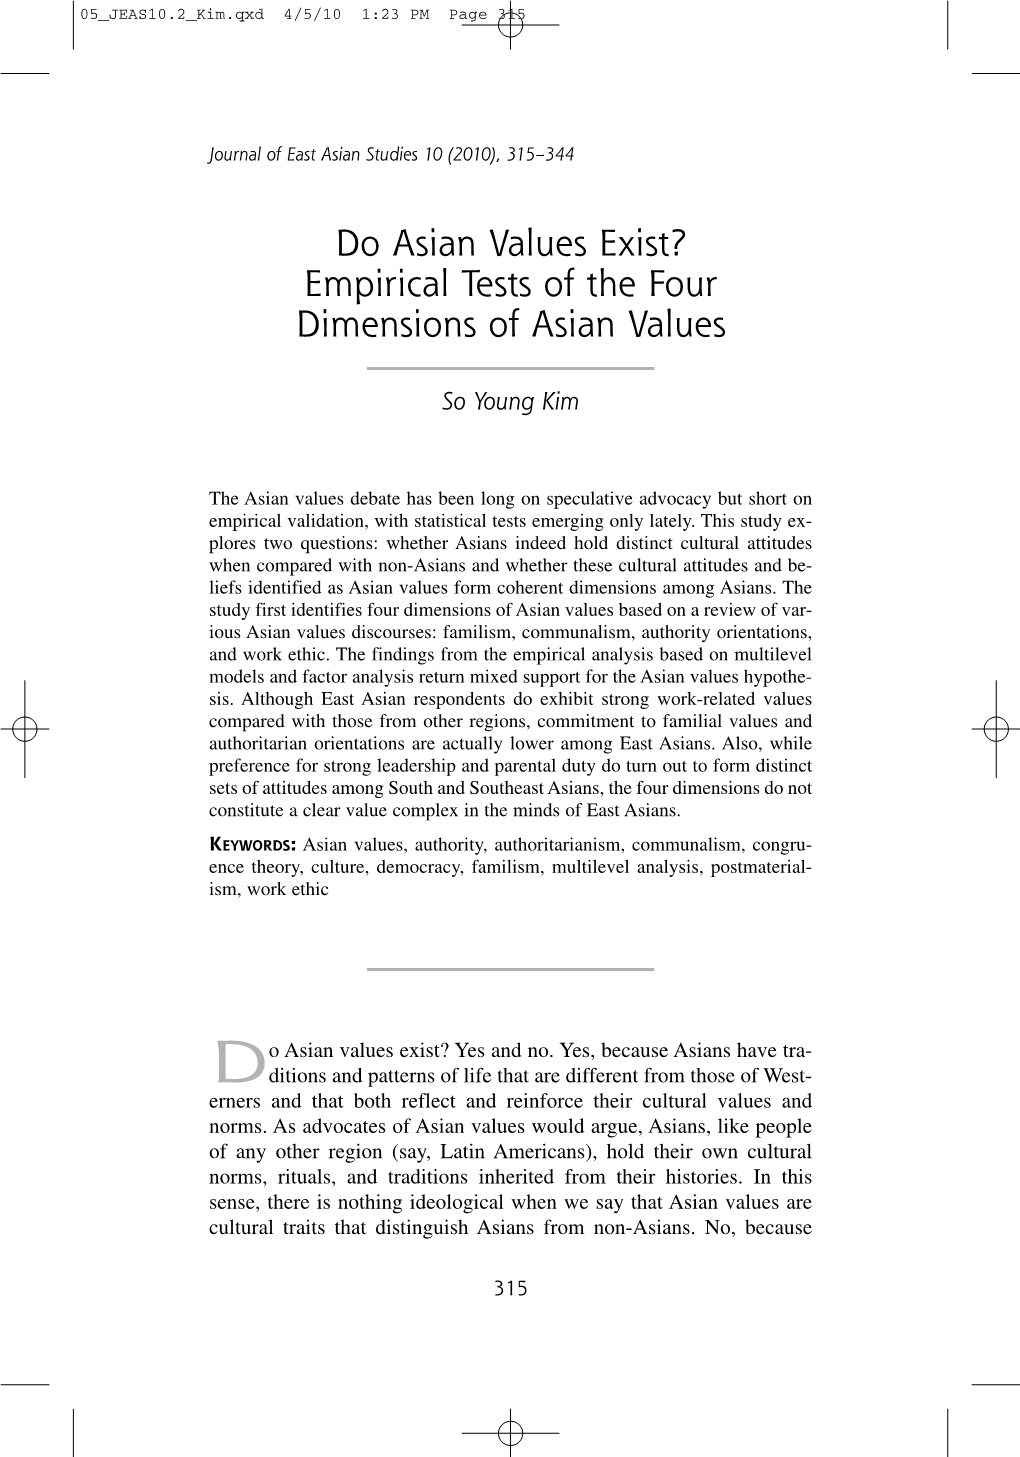 Do Asian Values Exist? Empirical Tests of the Four Dimensions of Asian Values